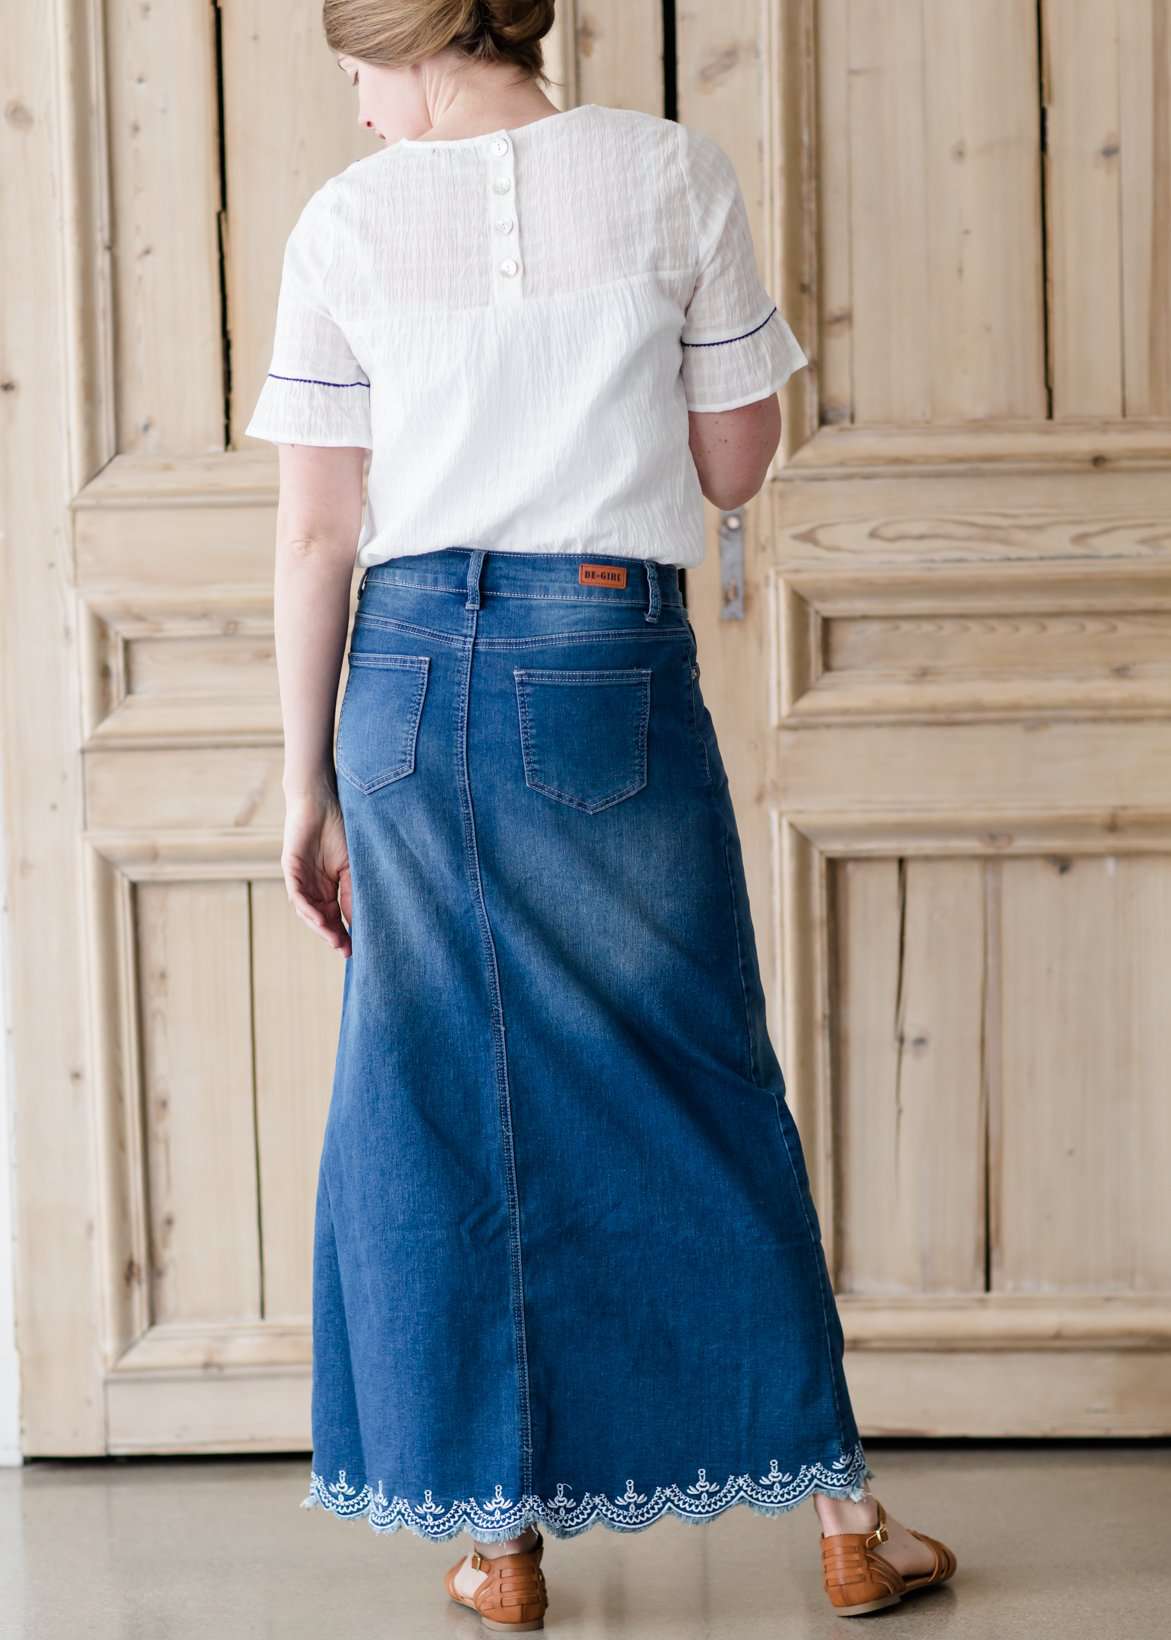 long denim maxi skirt with no slit and a scallop lace hem